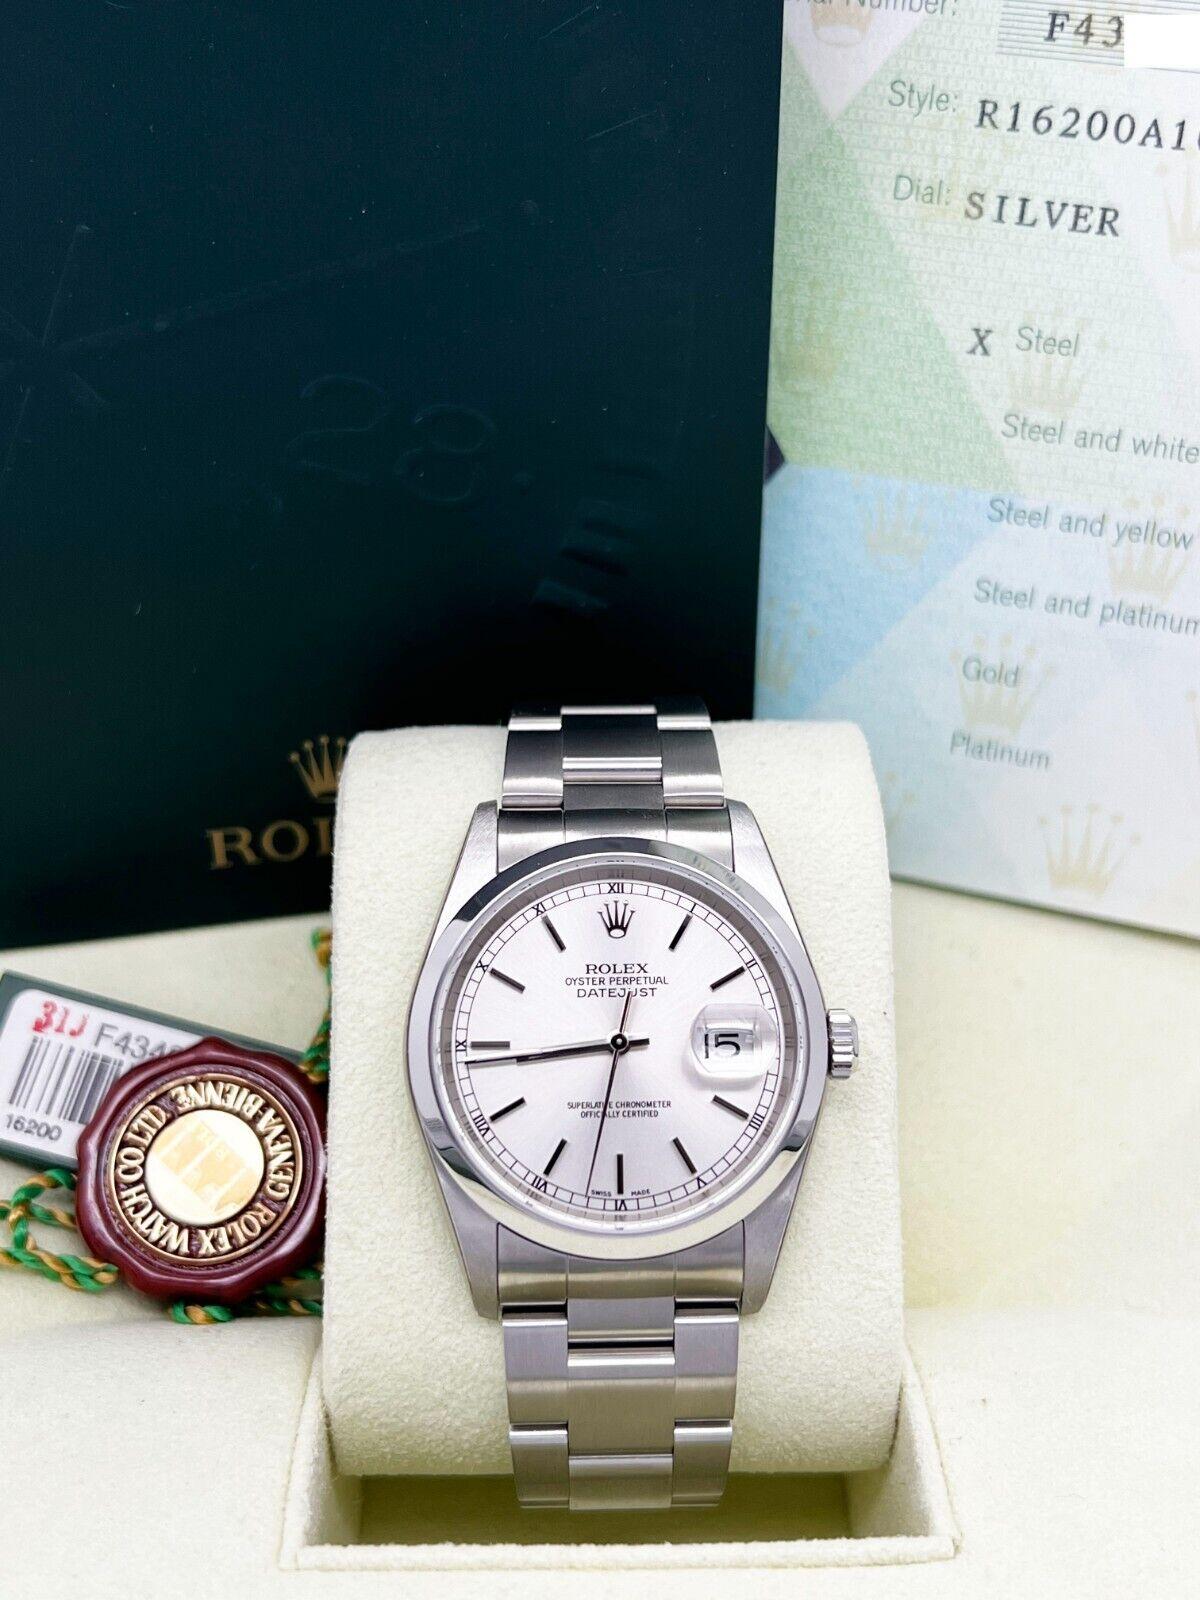 Rolex Datejust 16200 Silver Dial Stainless Steel Box Paper 2005 For Sale 2